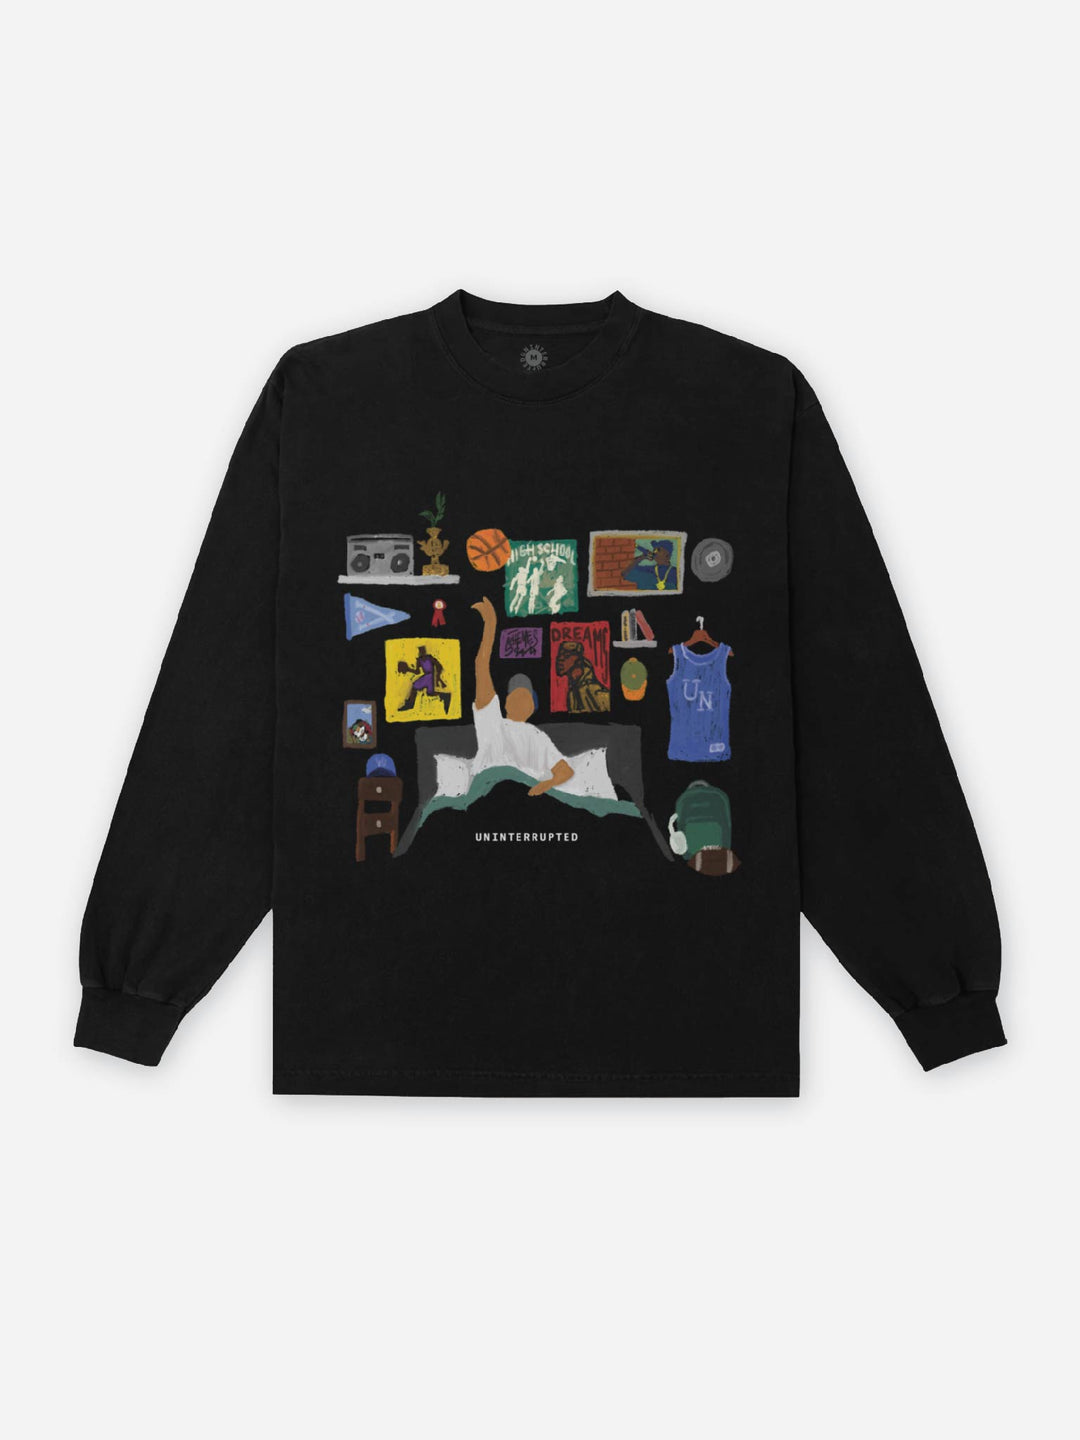 Schemes & Dreams Posters on the Wall Black Long Sleeve Tee